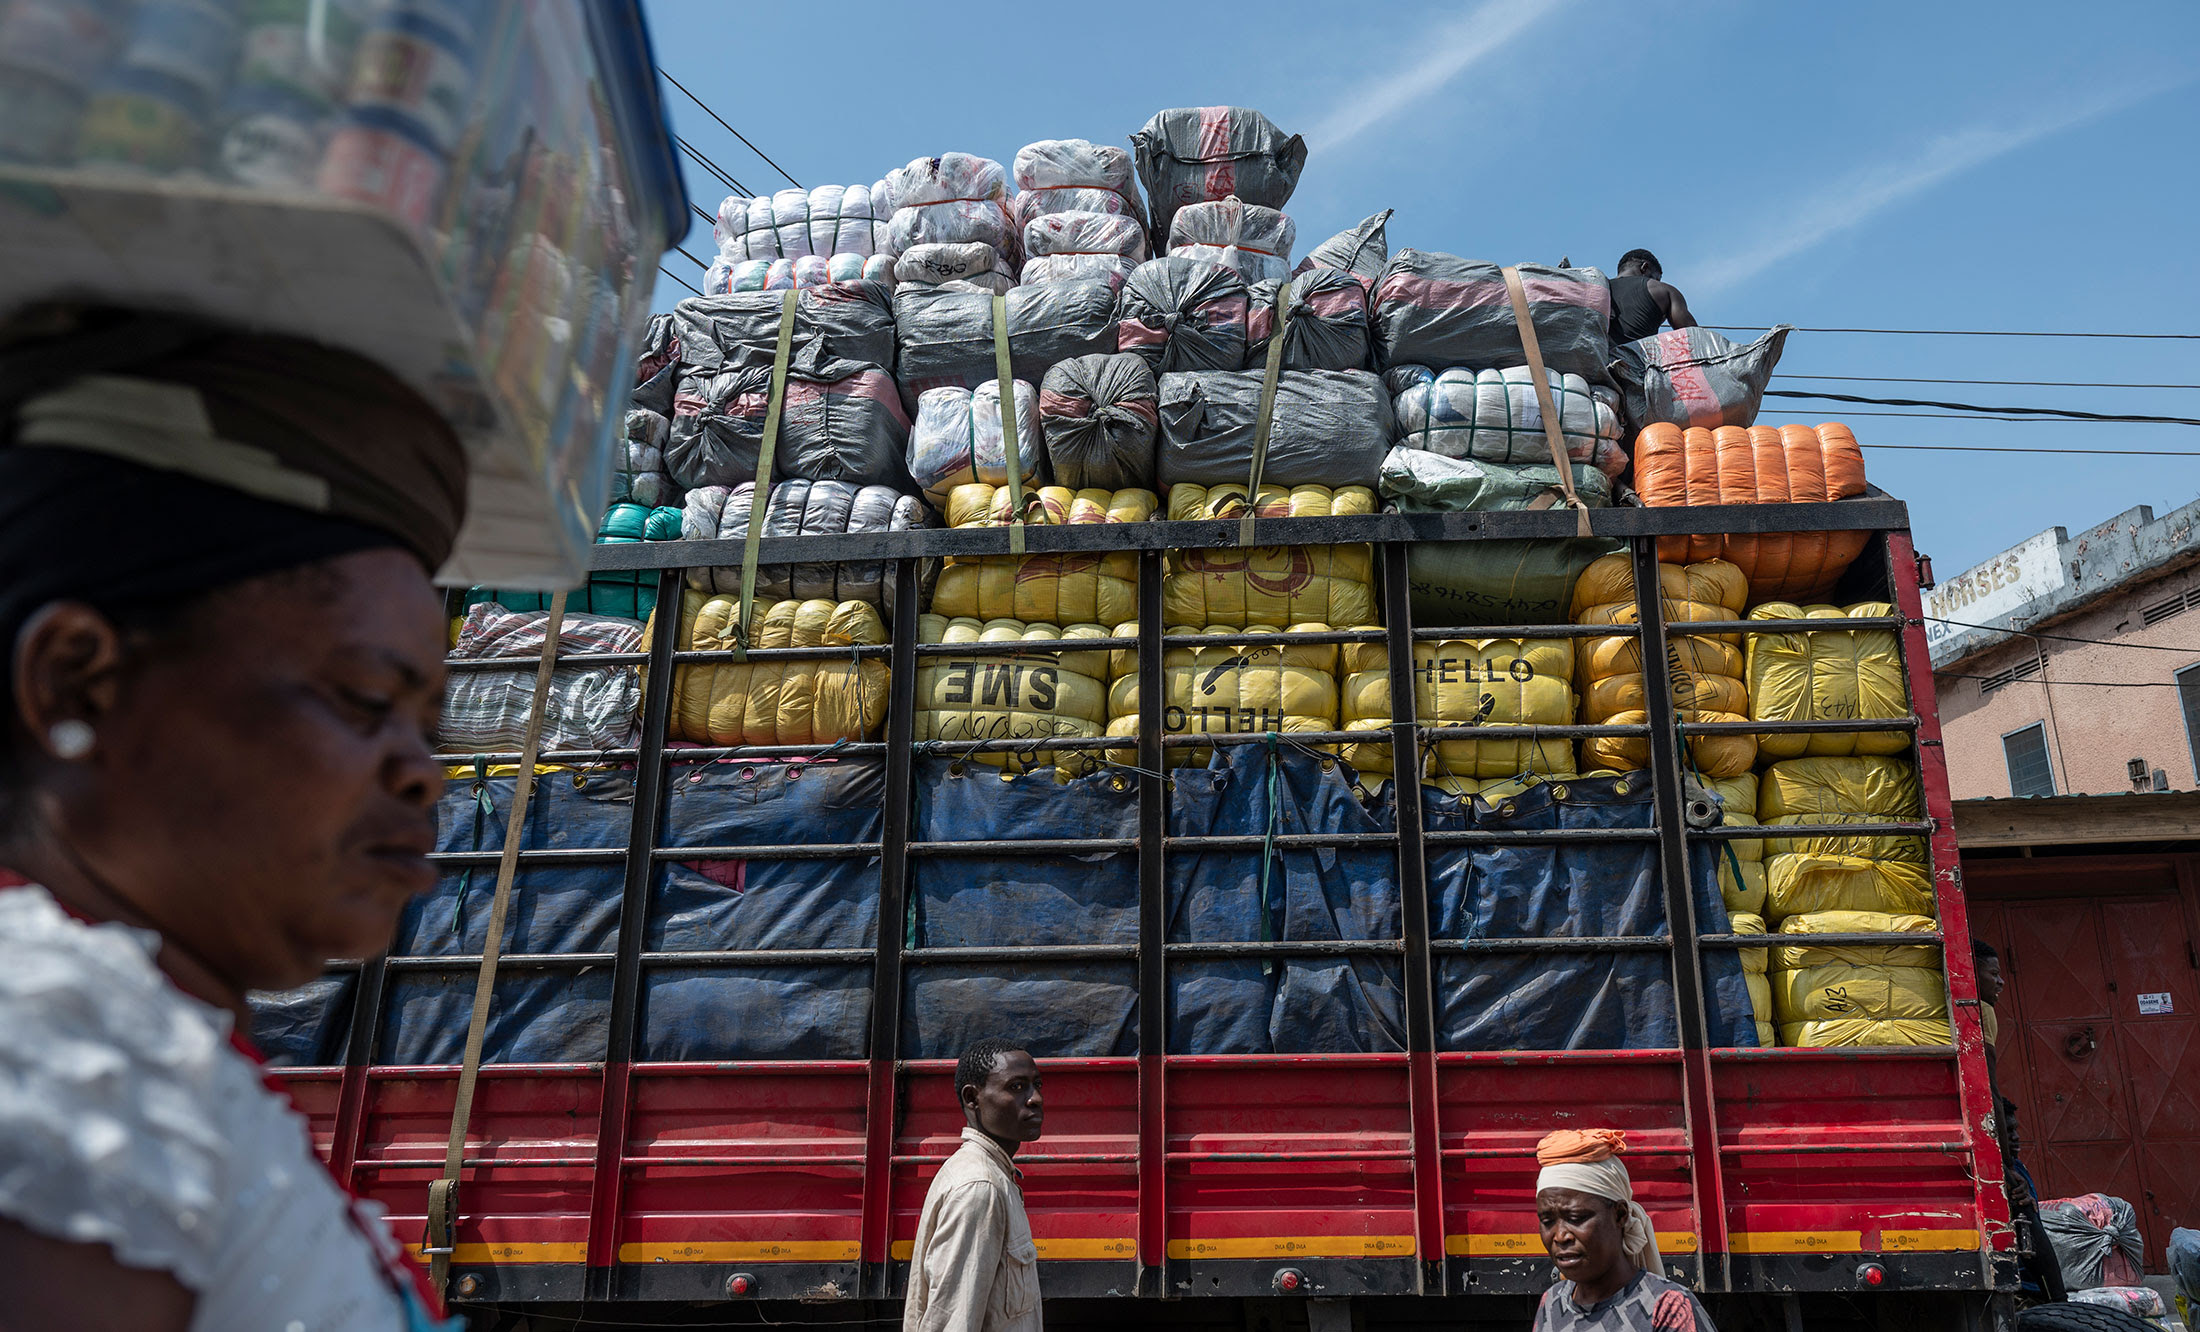 A Kayayei walks past a truck loaded with bales of secondhand clothing.